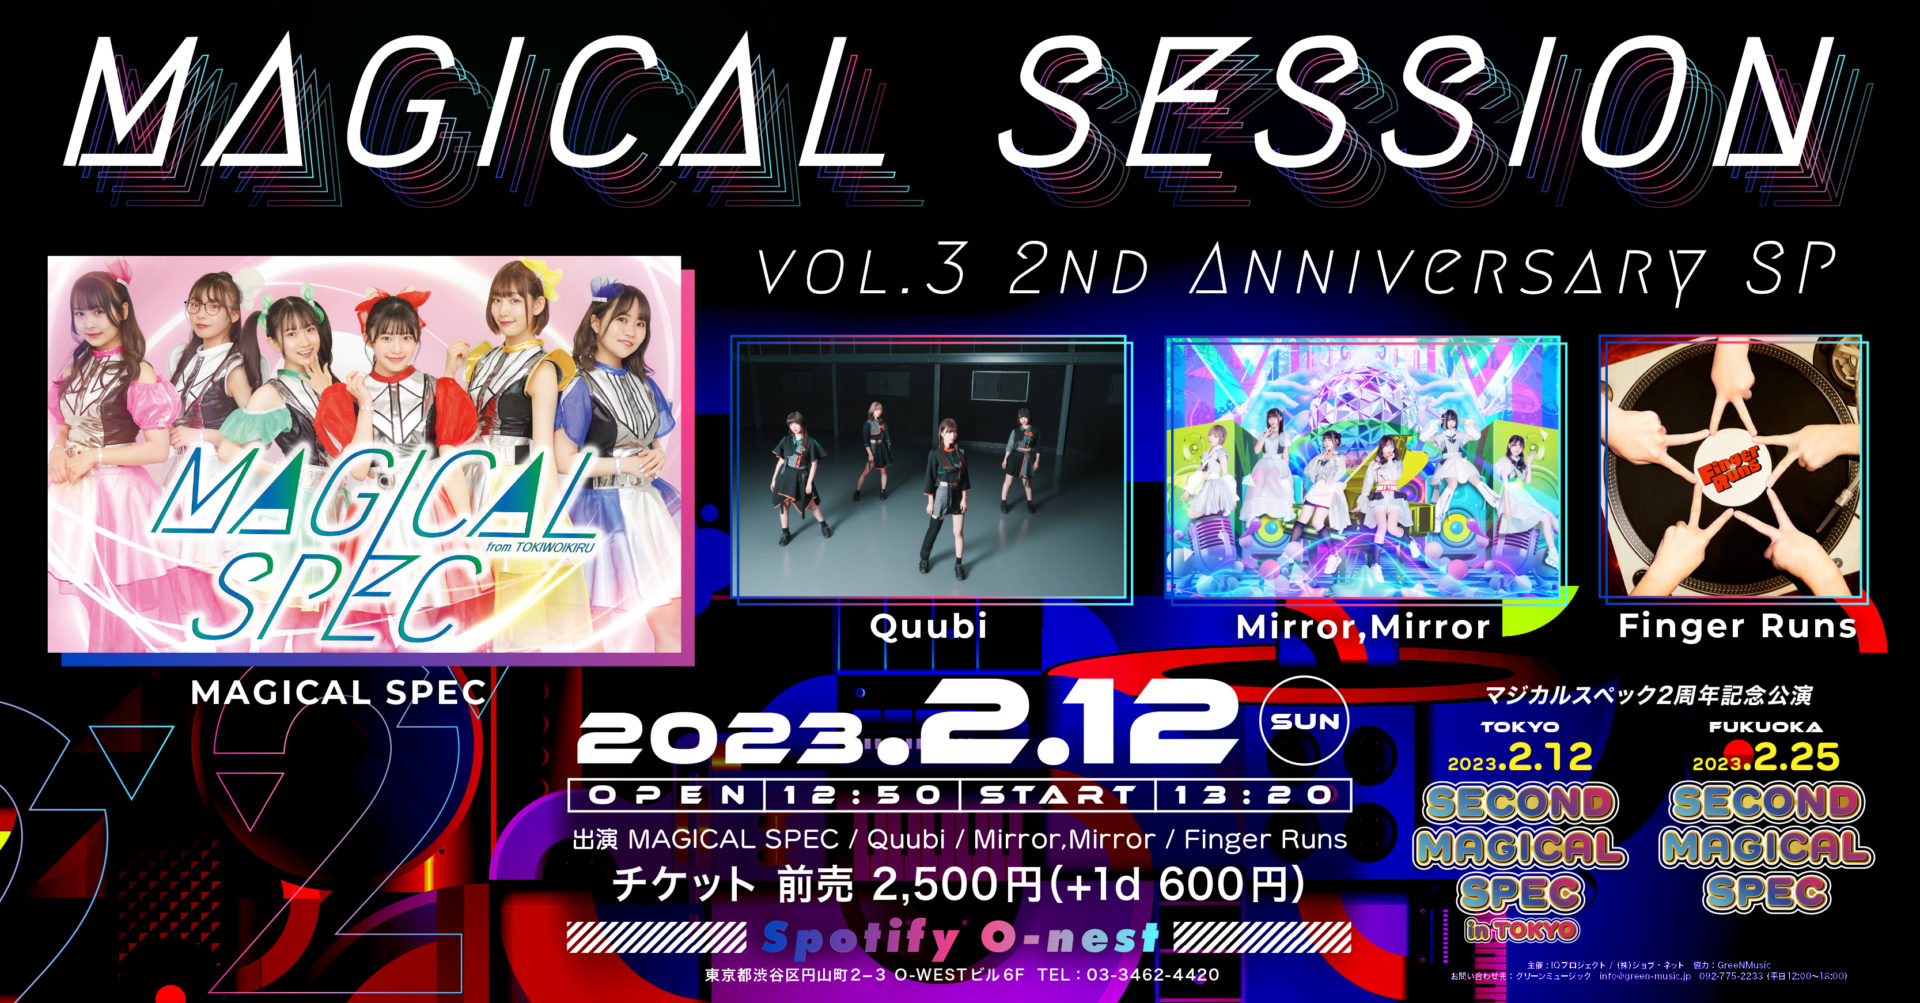 MAGICAL SESSION vol.3 2nd Anniversary SP